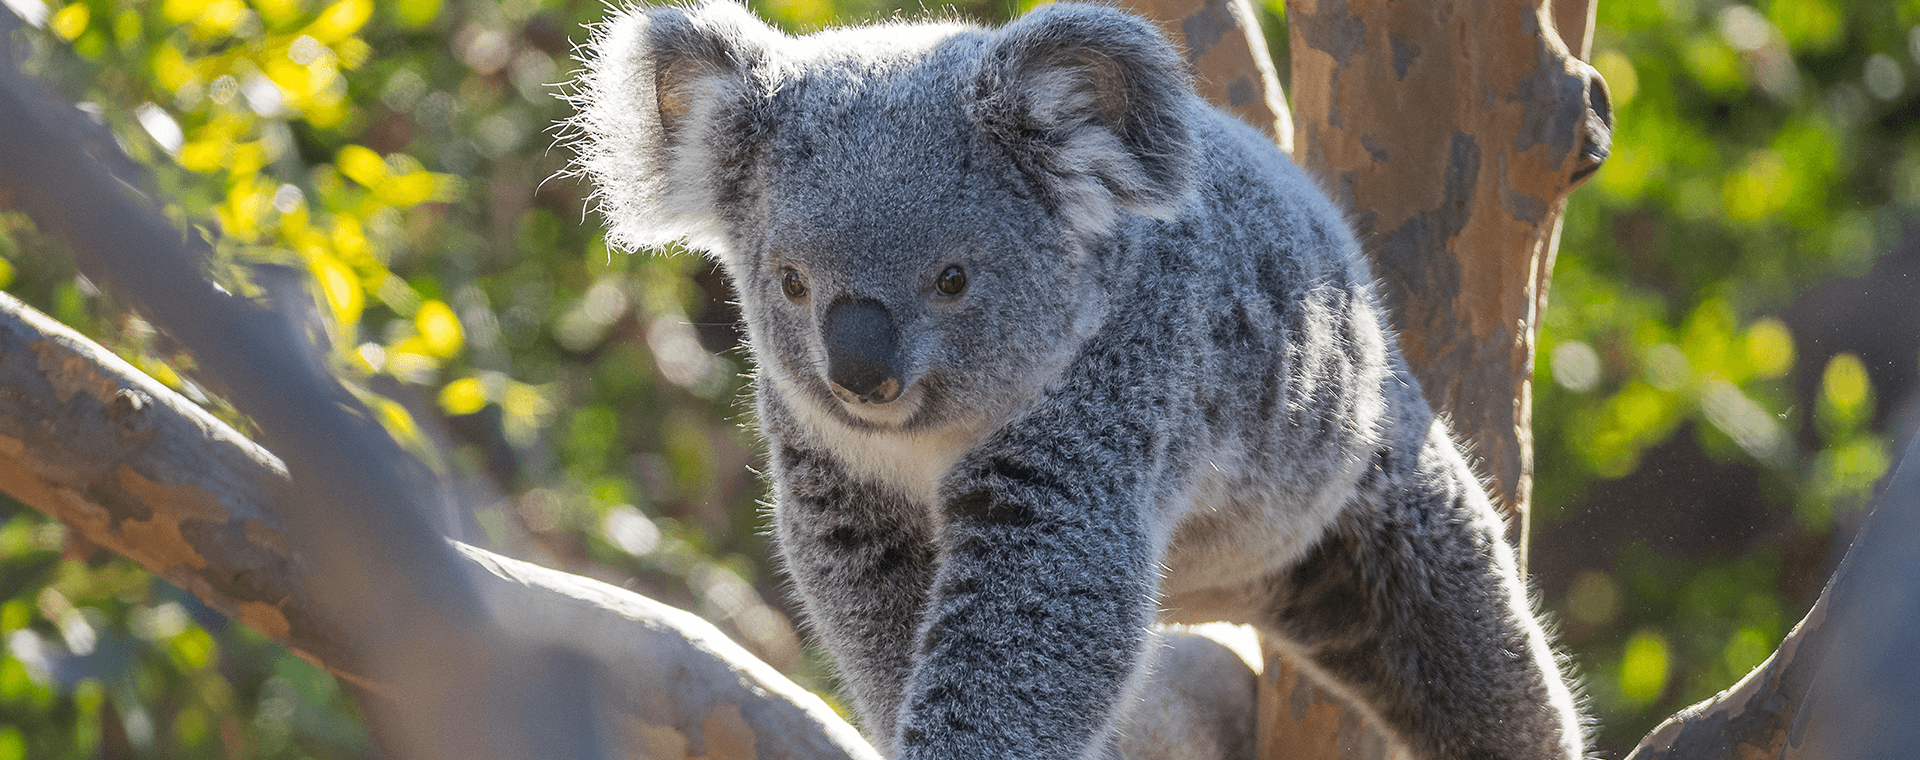 young koala on a branch